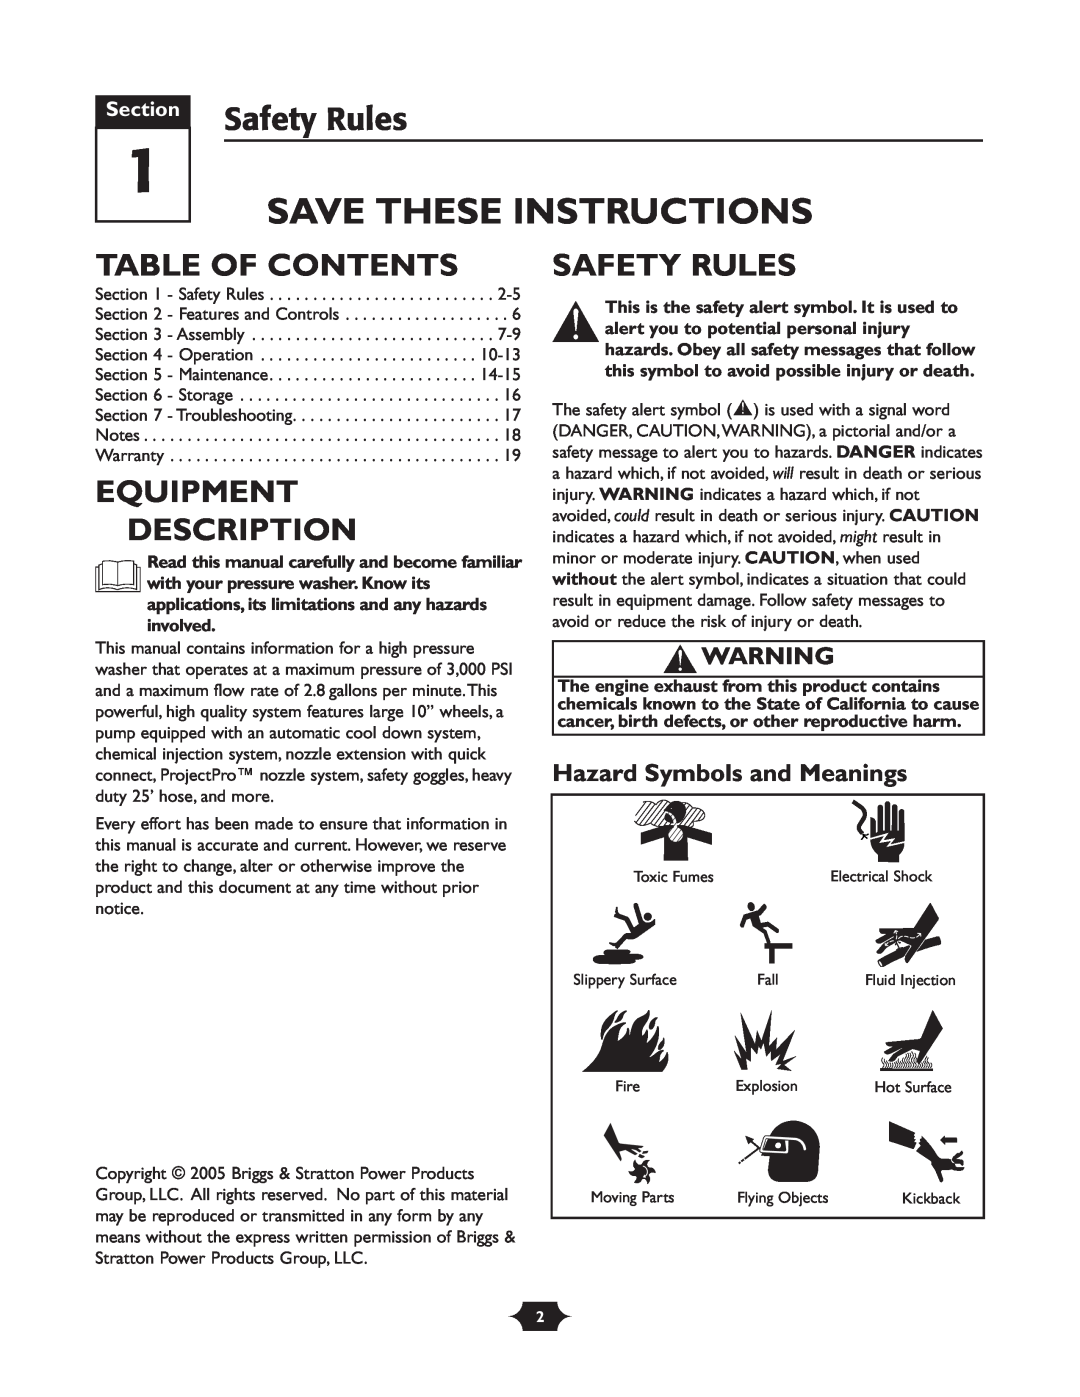 Troy-Bilt 020242-4 manual Safety Rules, Table Of Contents, Equipment Description, Hazard Symbols and Meanings, Section 